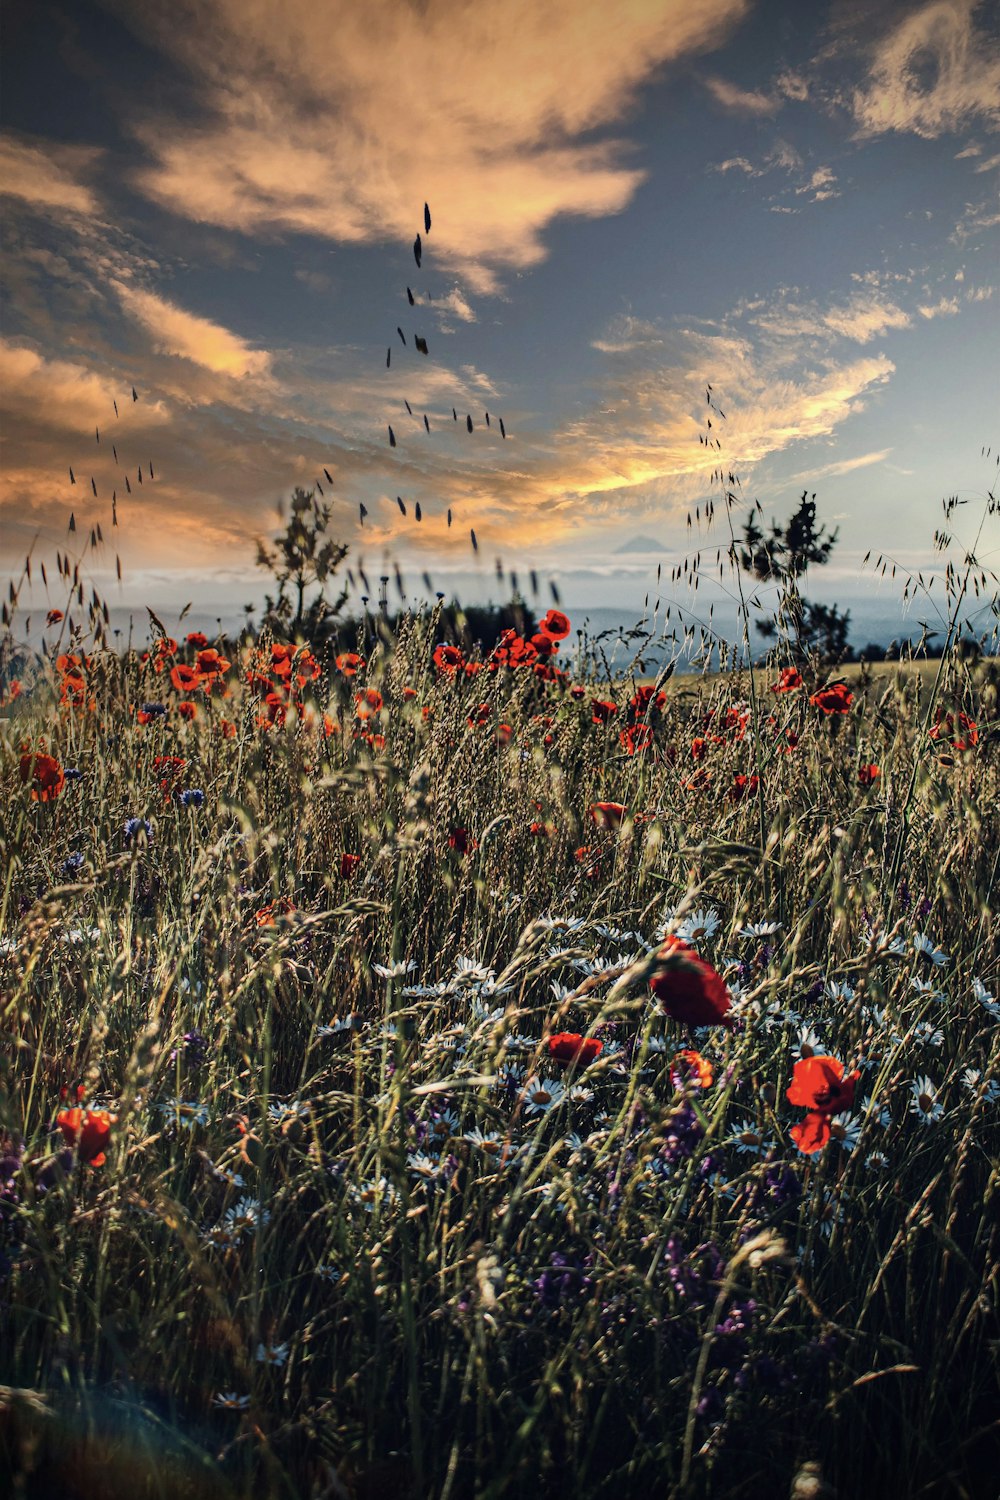 a field full of red flowers under a cloudy sky